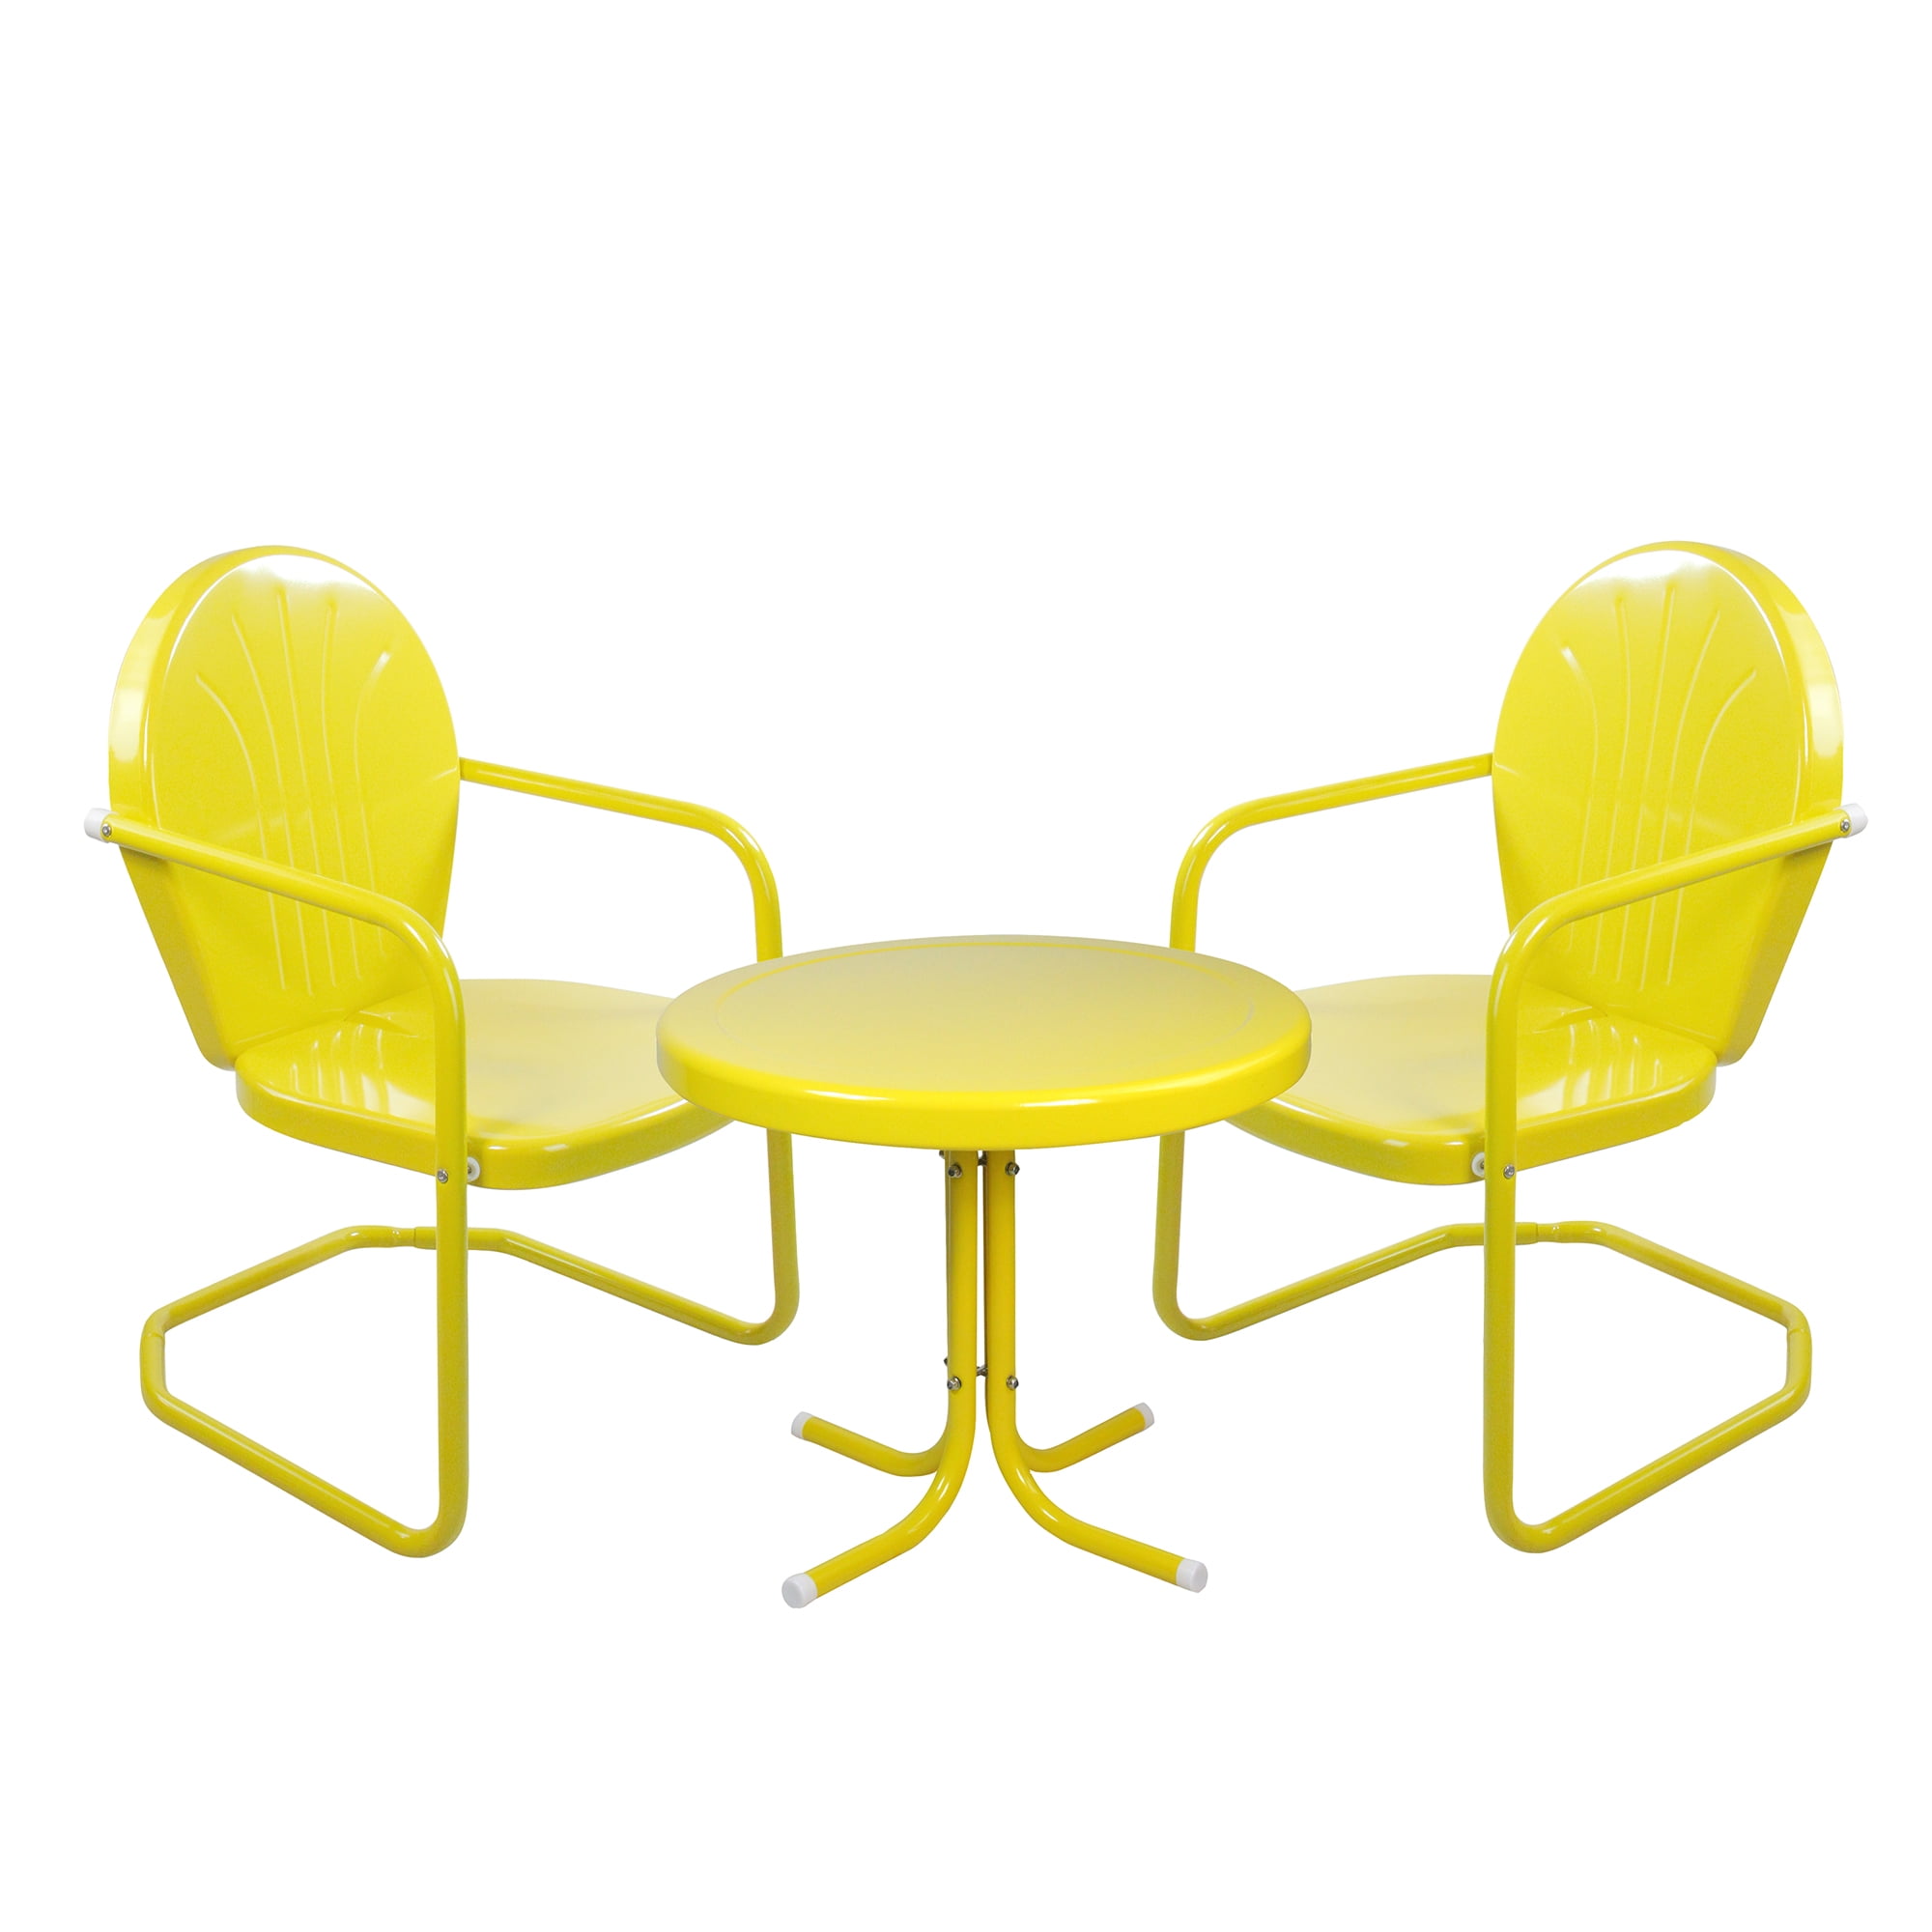 3 Piece Retro Metal Tulip Chairs And, Retro Metal Chairs And Table